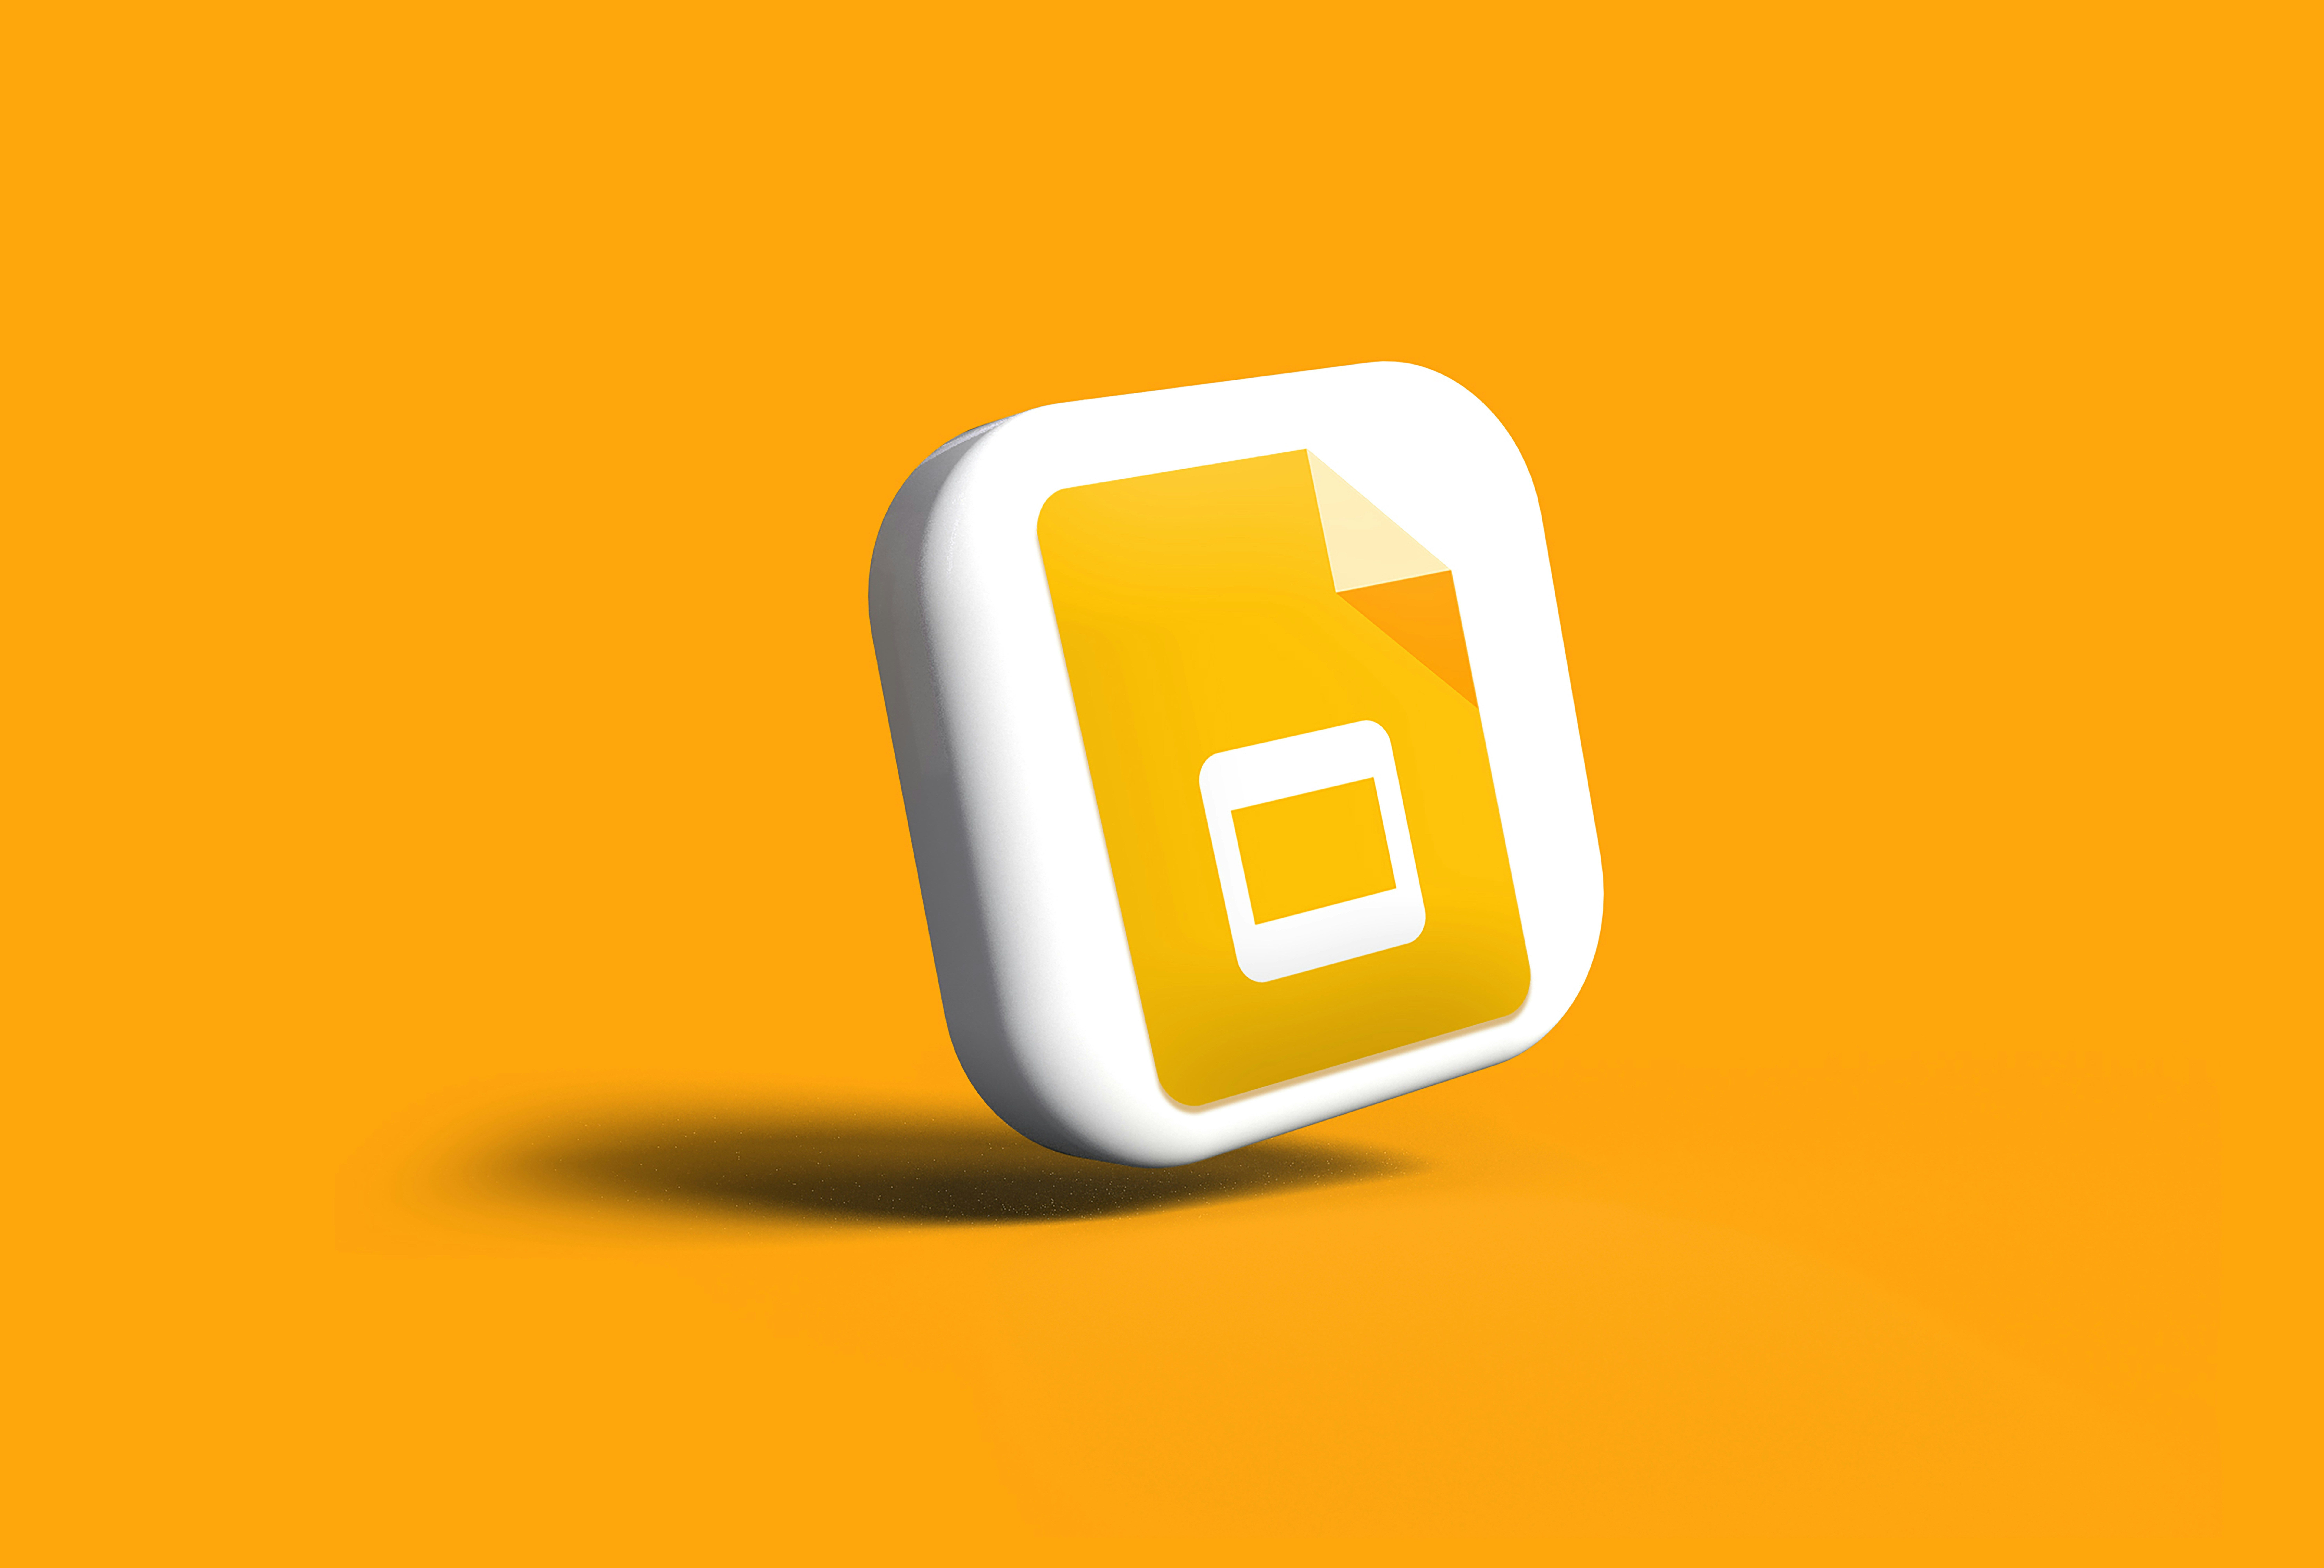 The image features a 3D icon of Google Slides against an orange background. The icon is angled and casts a slight shadow on the surface.